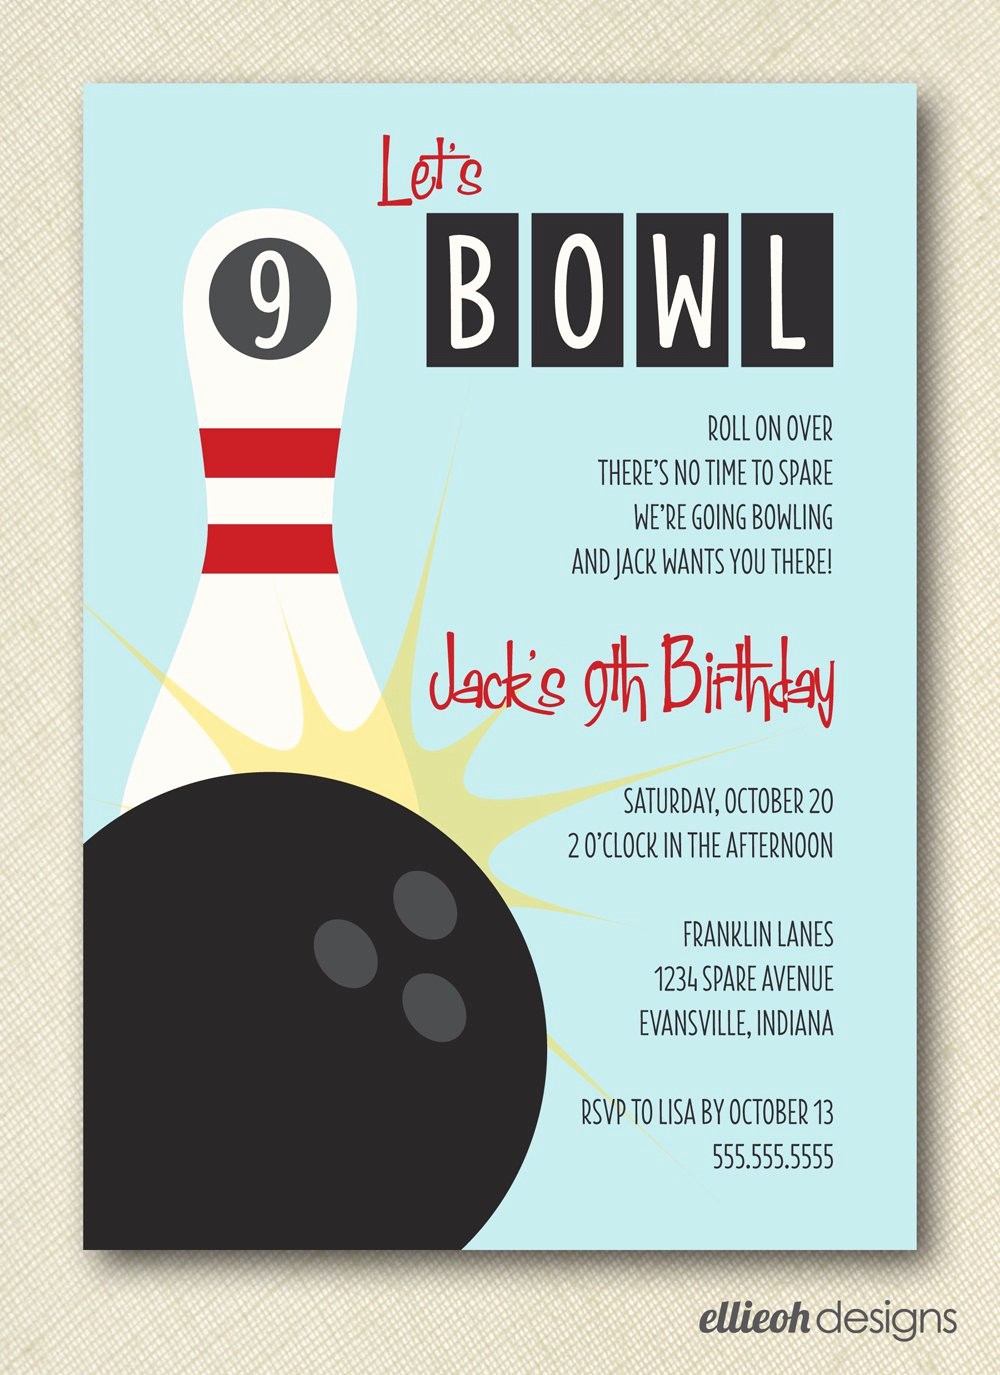 Free Printable Party Invitations Templates Elegant Free Printable Bowling Party Invitation Templates